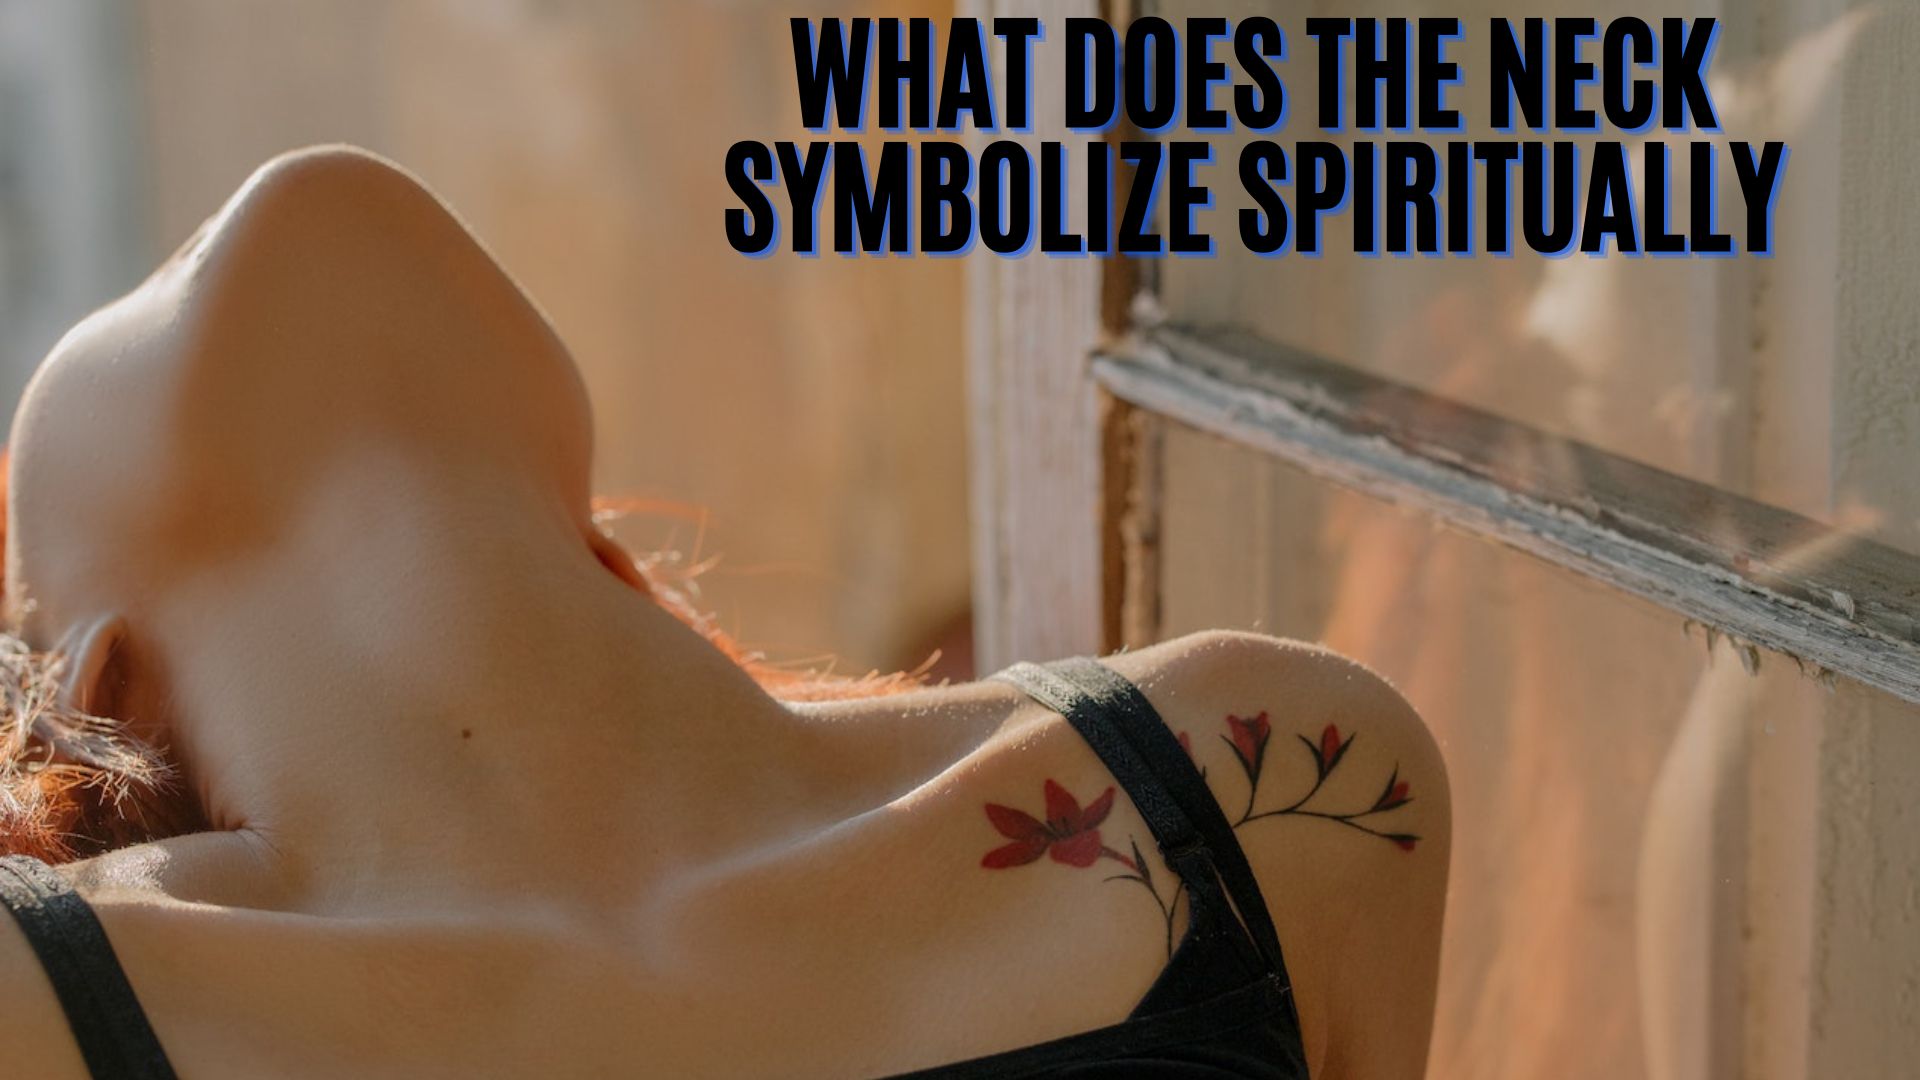 What Does The Neck Symbolize Spiritually?